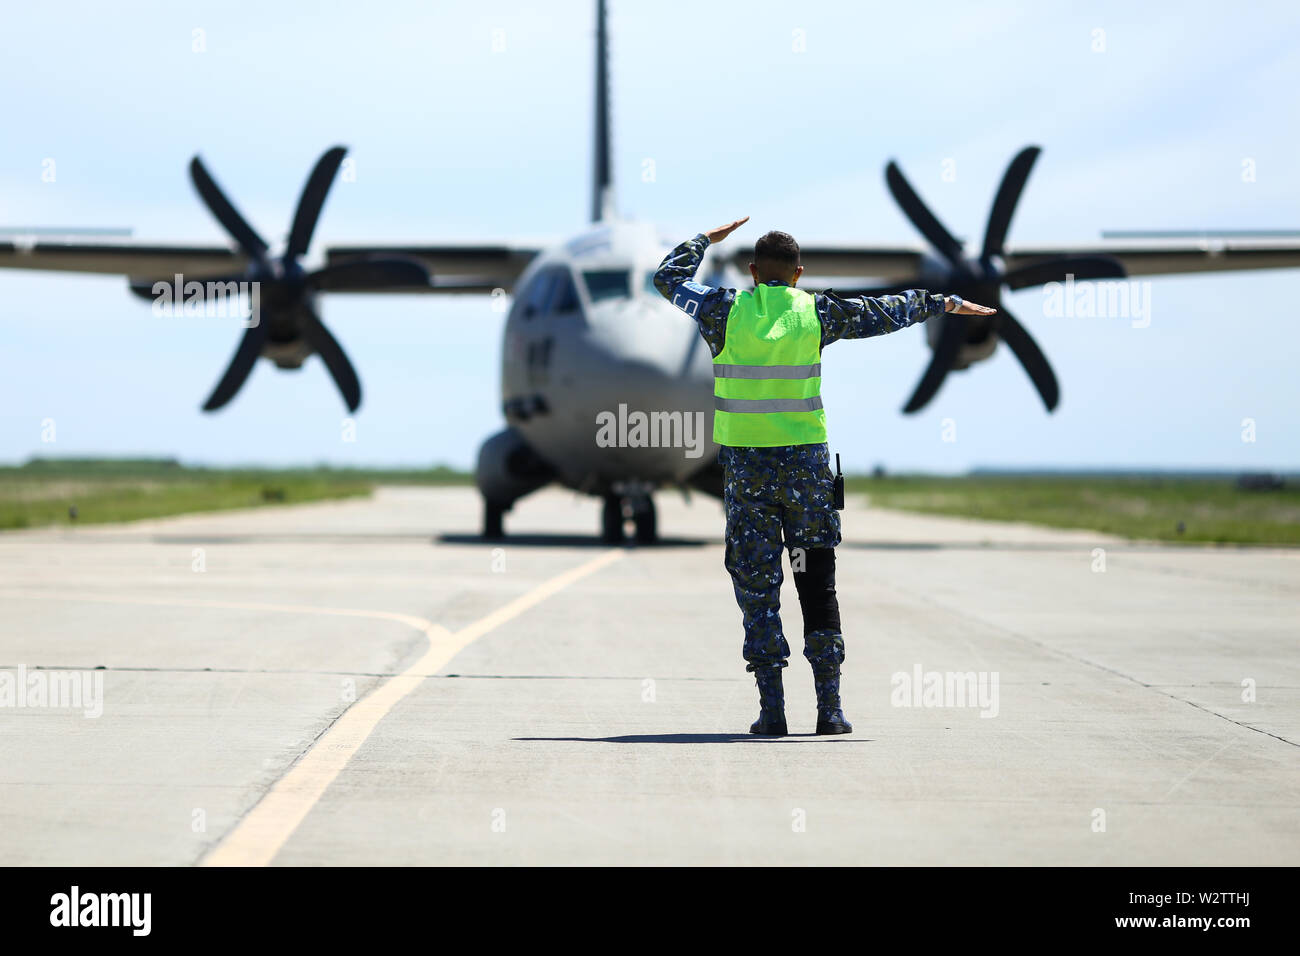 Boboc, Romania - May 22, 2019: Ground personnel is aircraft marshalling an Alenia C-27J Spartan military cargo plane from the Bulgarian Air Force that Stock Photo